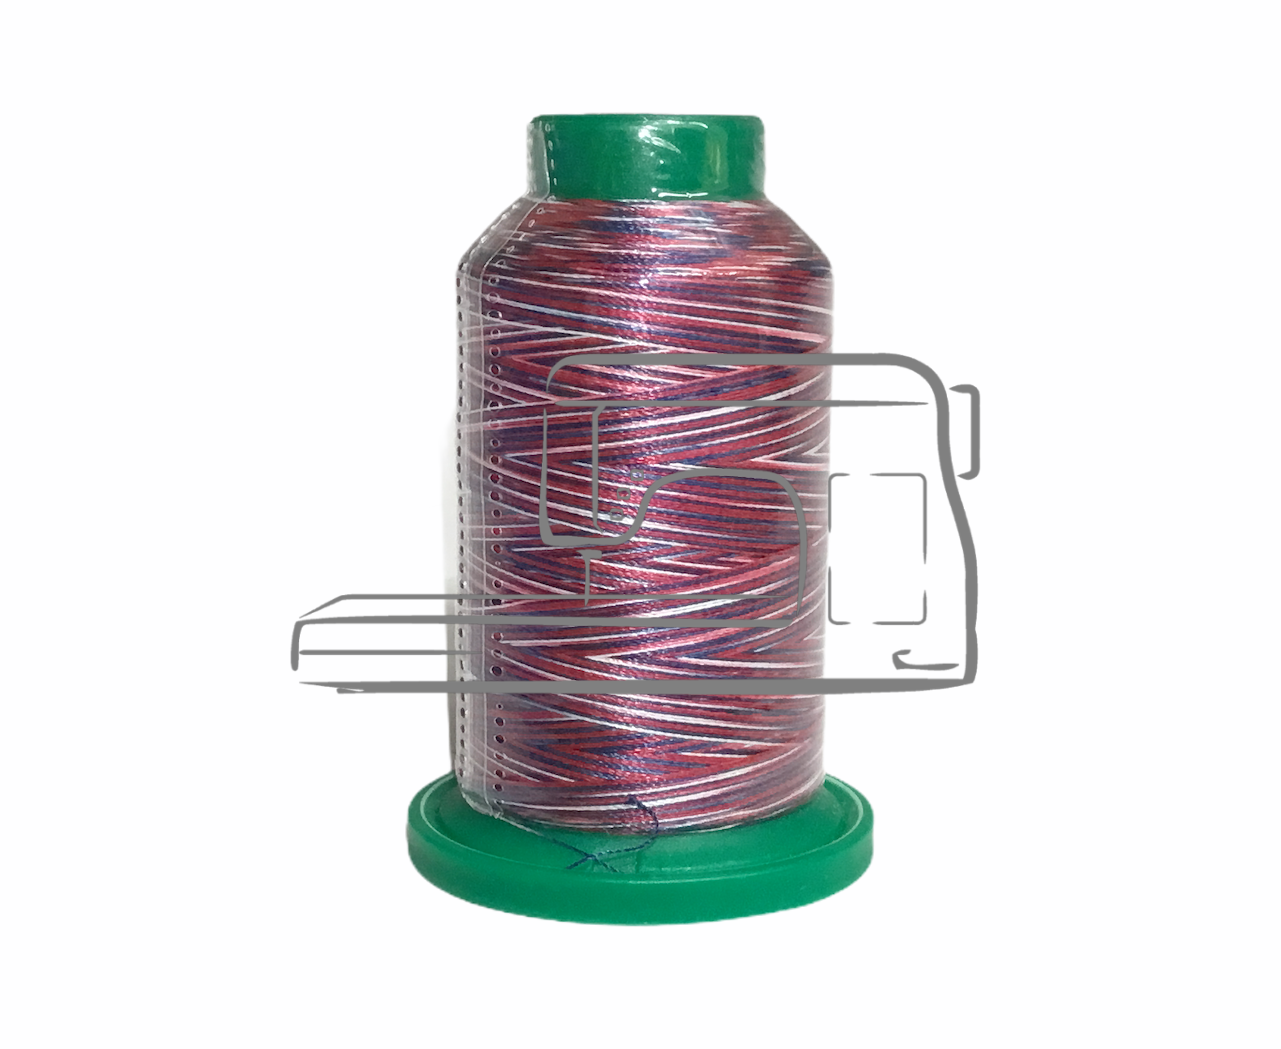 Isacord Isacord multicoloured sewing and embroidery thread 9918 1000m